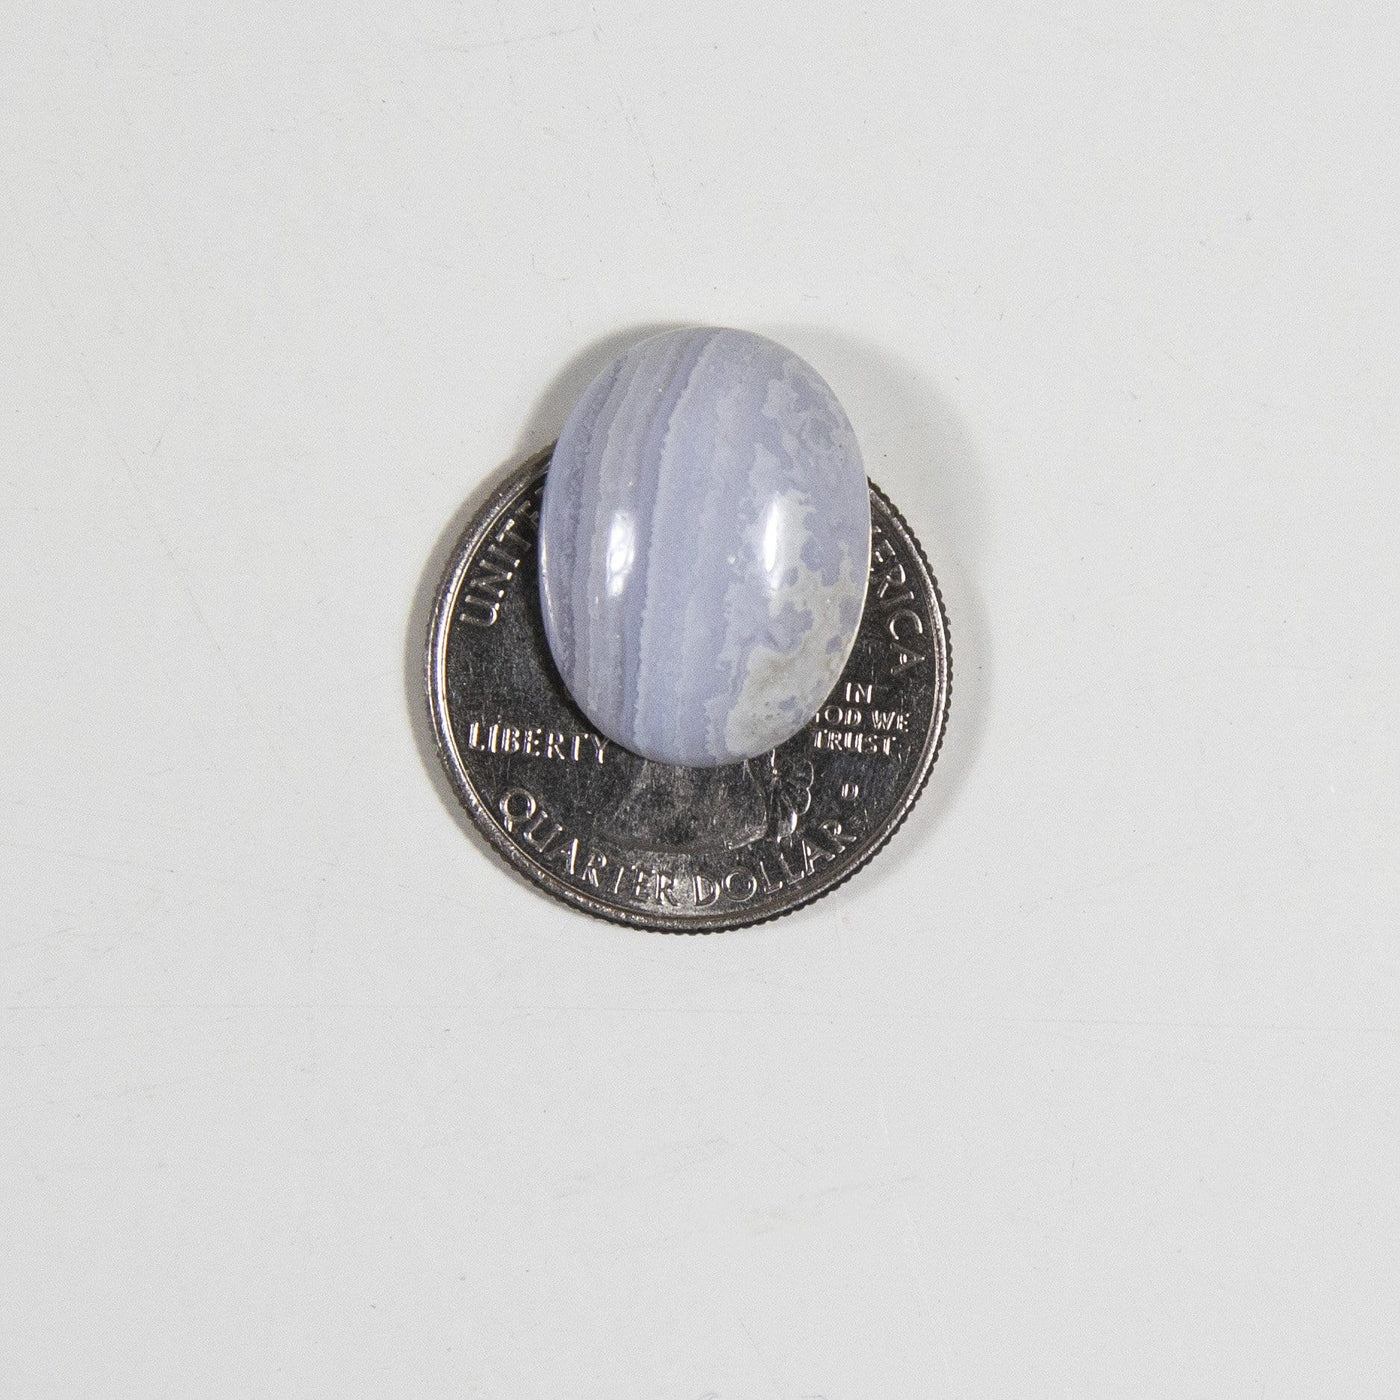 Blue lace cabochon displayed on quarter for another size reference